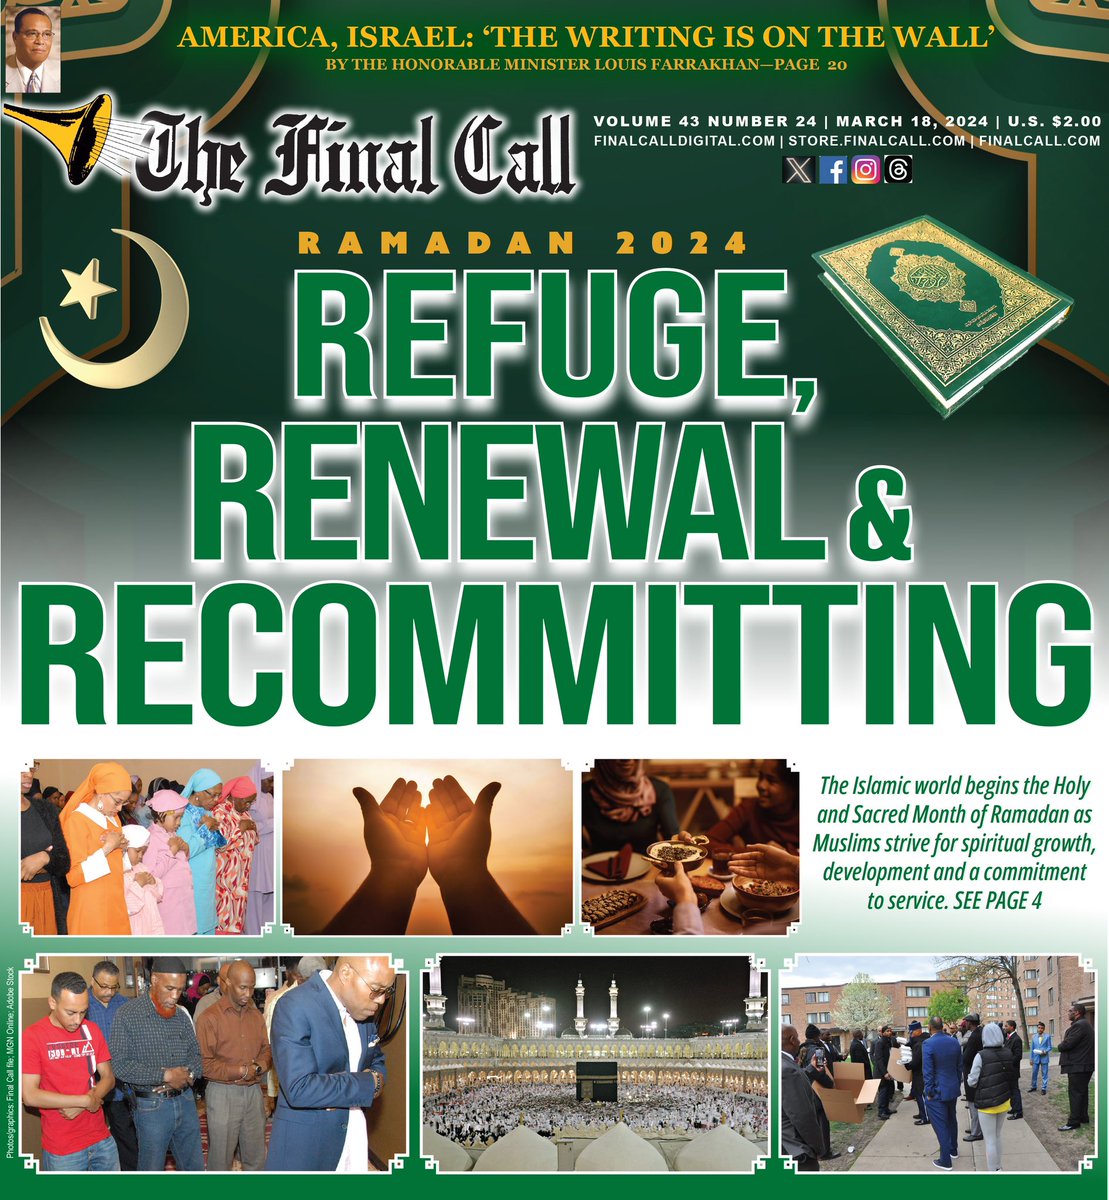 NEW EDITION ::: RAMADAN 2024 REFUGE, RENEWALS RECOMMITTING The Islamic world begins the Holy and Sacred Month of Ramadan as Muslims strive for spiritual growth, development and a commitment to service. Read more at finalcalldigital.com